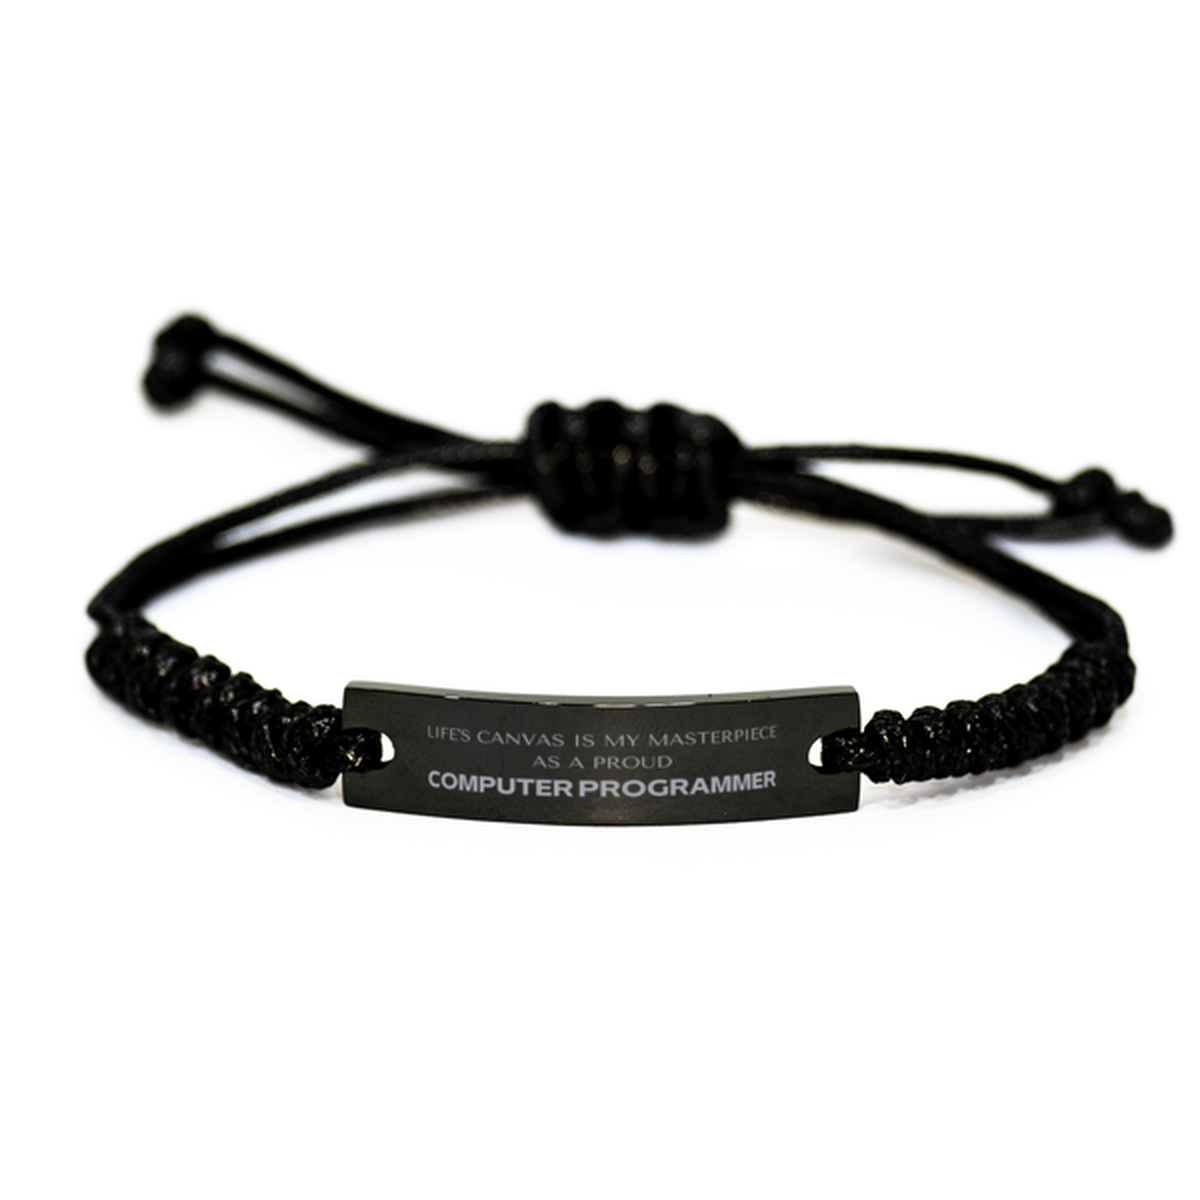 Proud Computer Programmer Gifts, Life's canvas is my masterpiece, Epic Birthday Christmas Unique Black Rope Bracelet For Computer Programmer, Coworkers, Men, Women, Friends